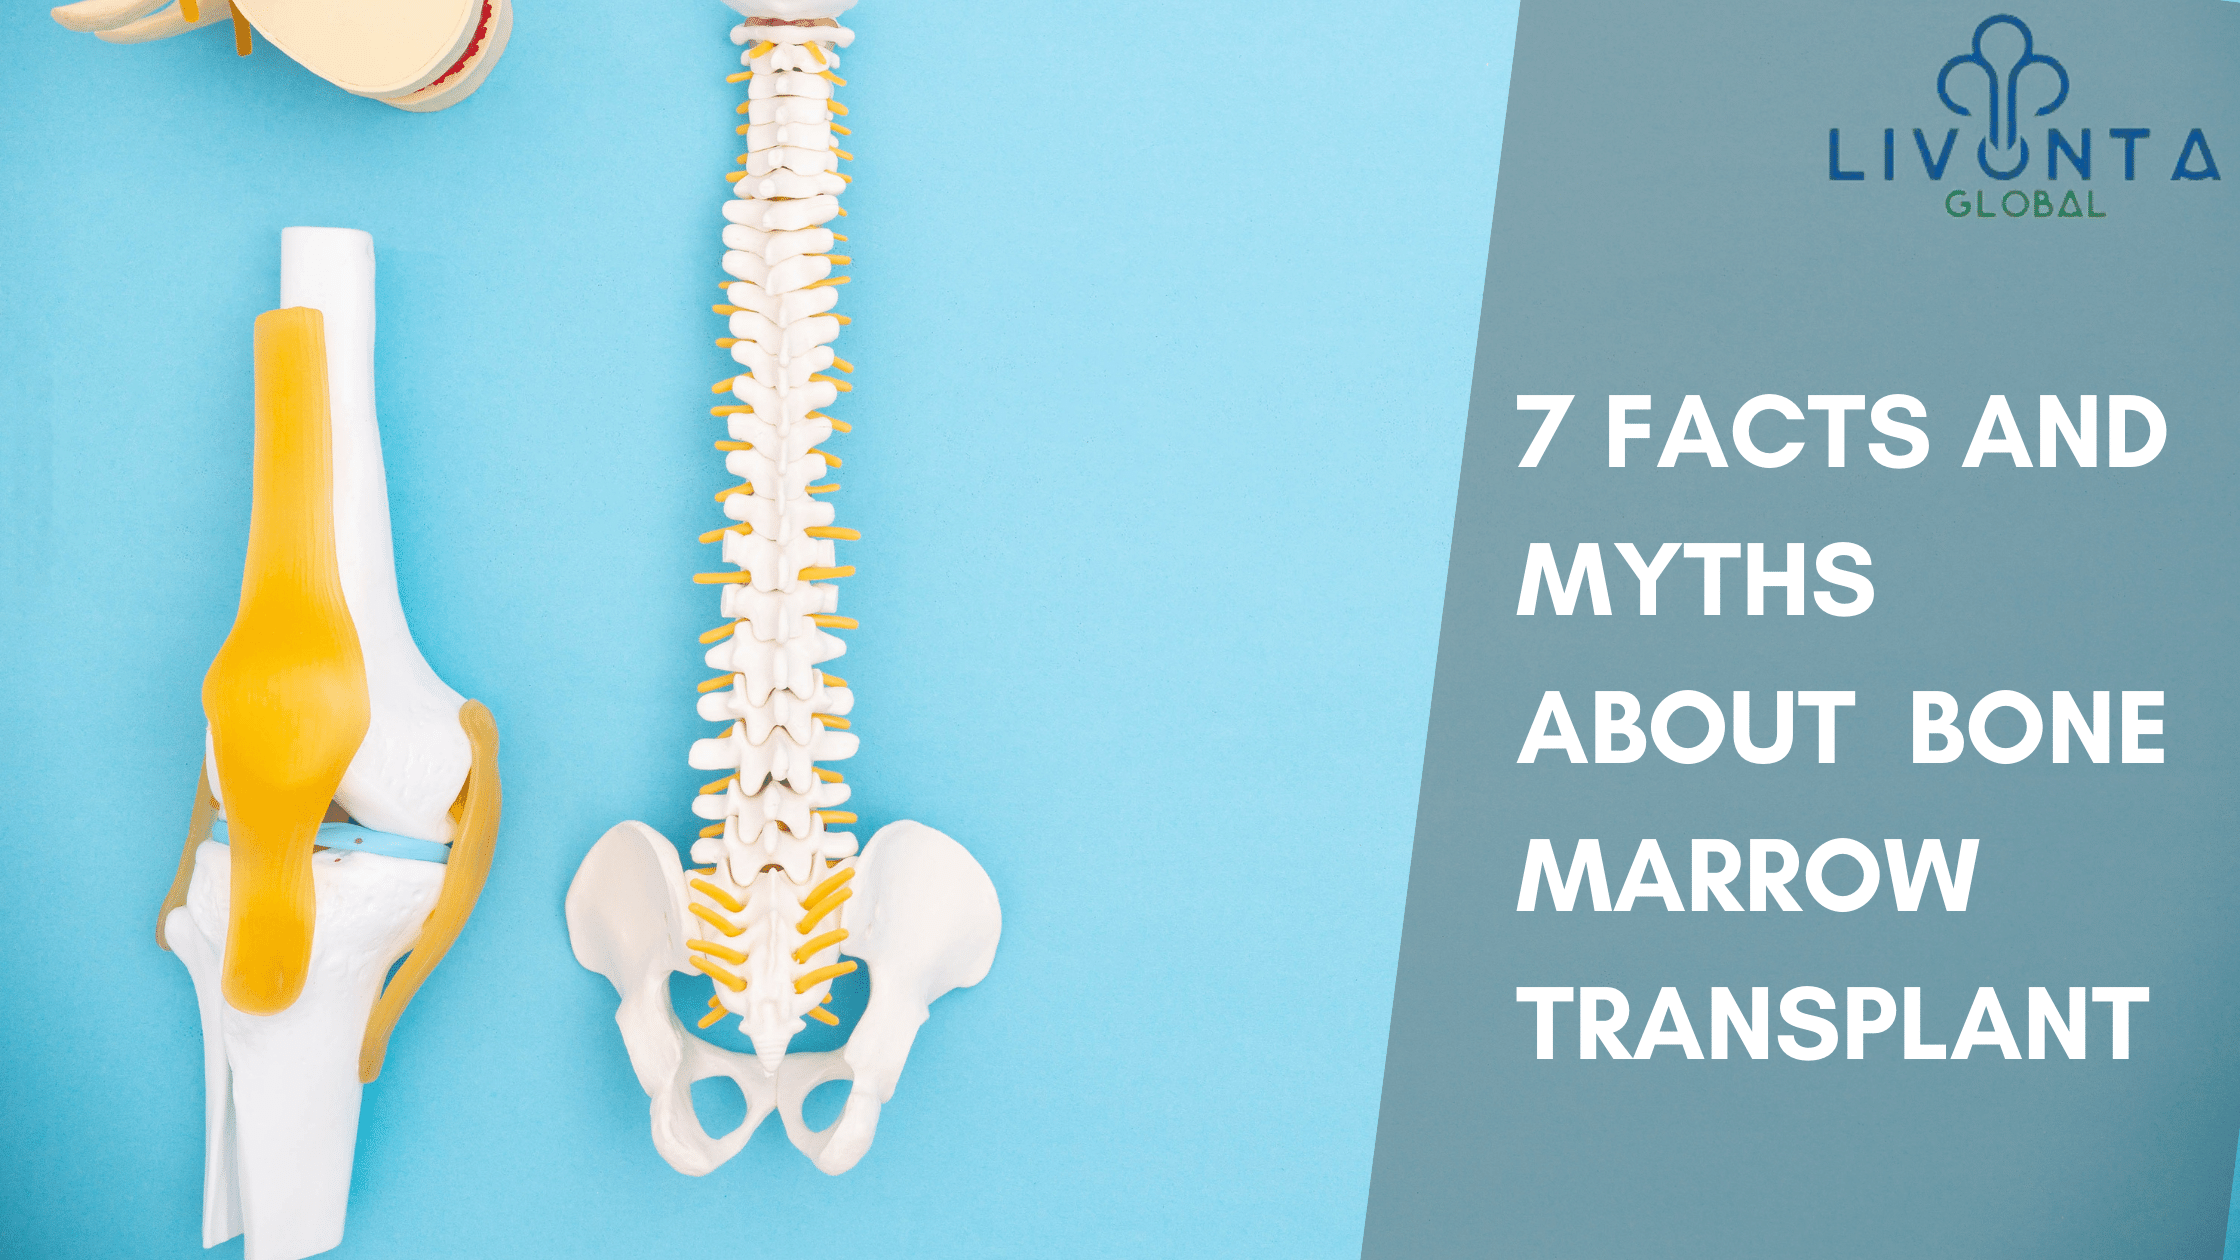 7 Facts And Myths About Bone Marrow Transplant